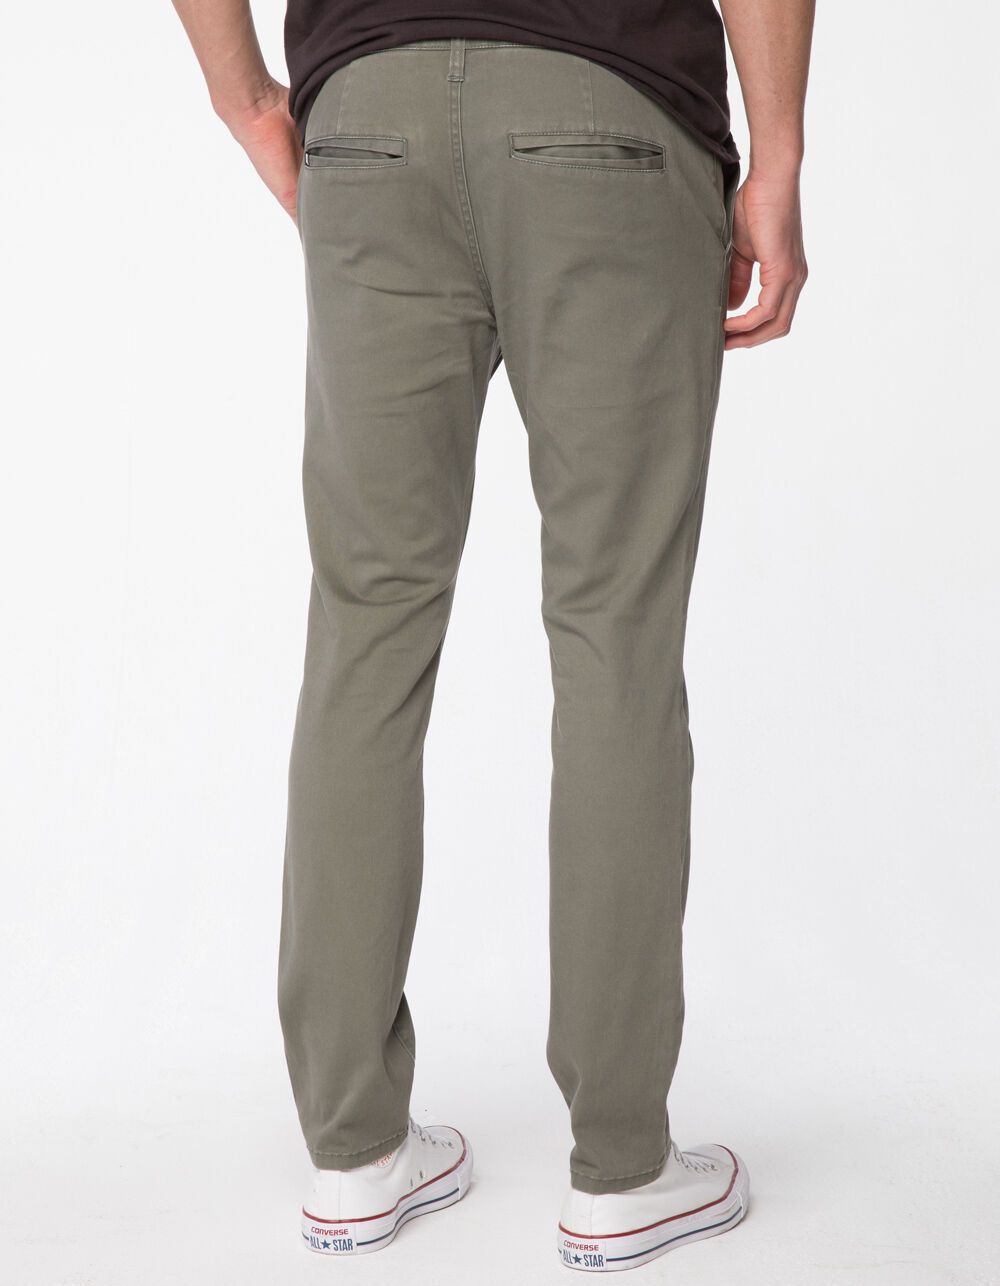 RSQ Seattle Skinny Taper Heather Olive Mens Chino Pants - HEATHER OLIVE ...